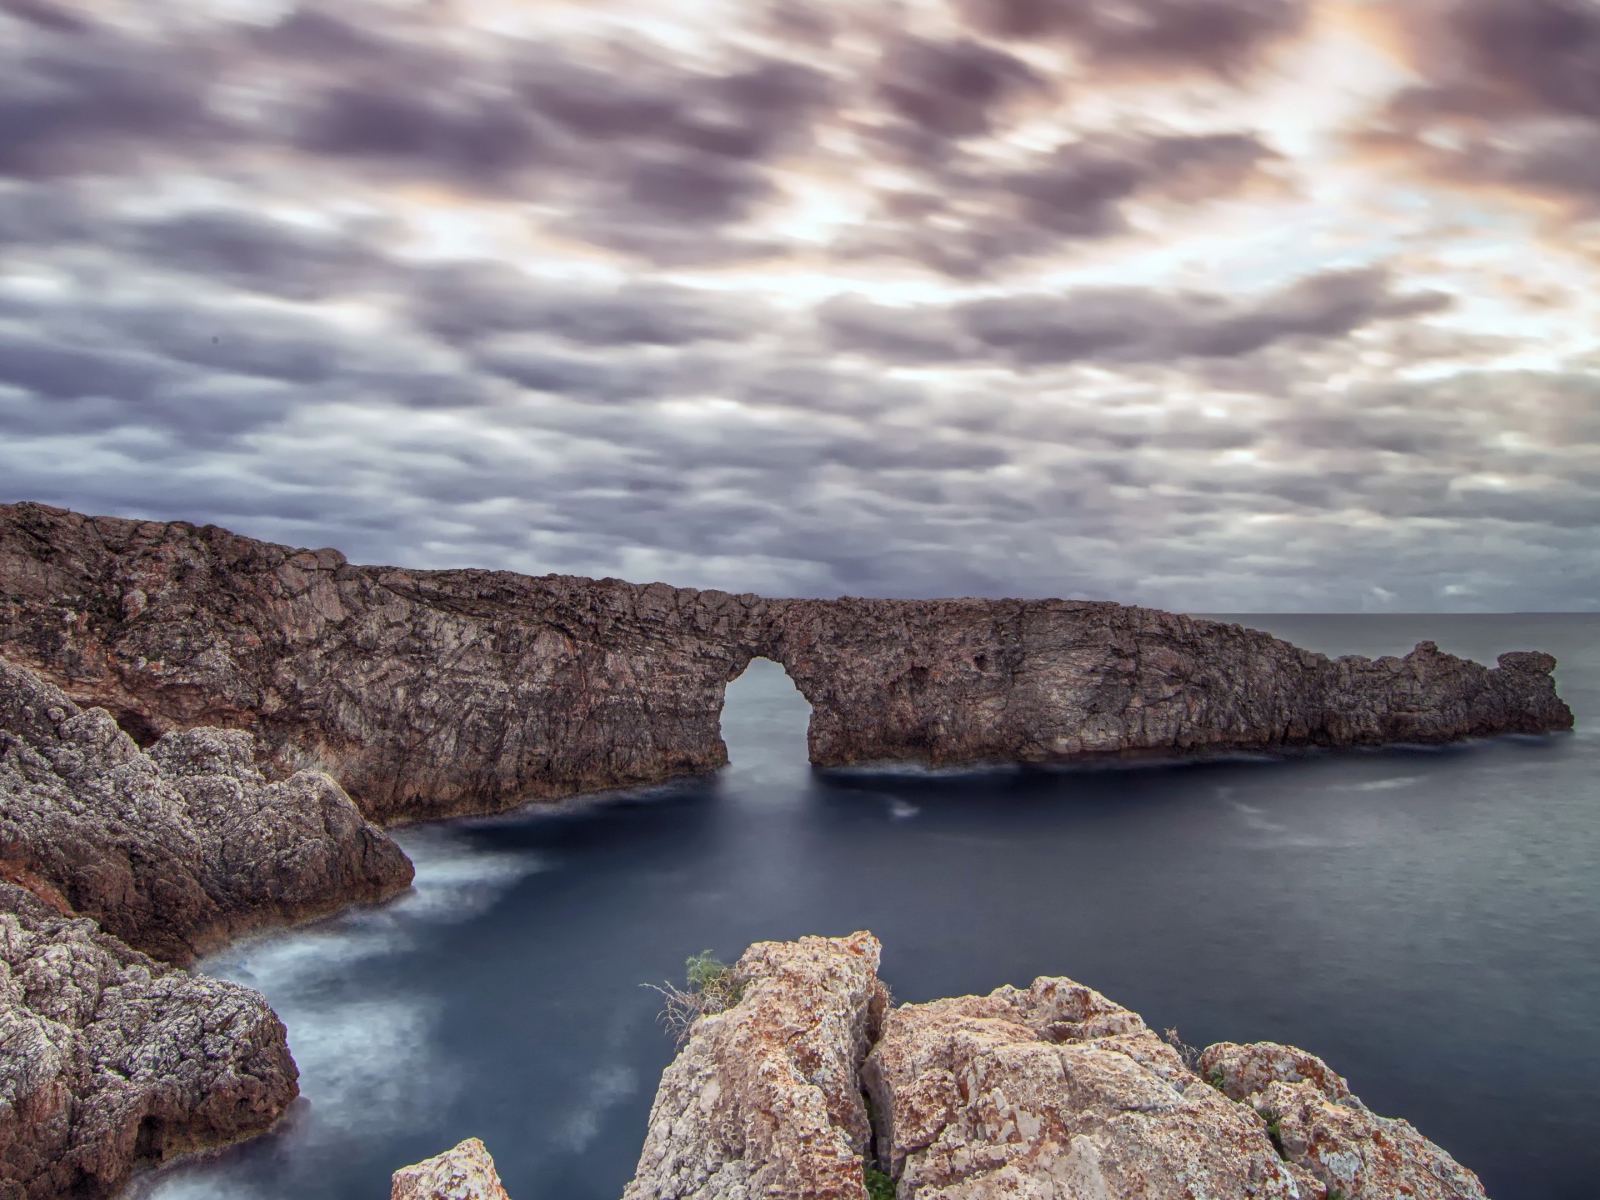 Arch in the rock in the sea under a cloudy sky